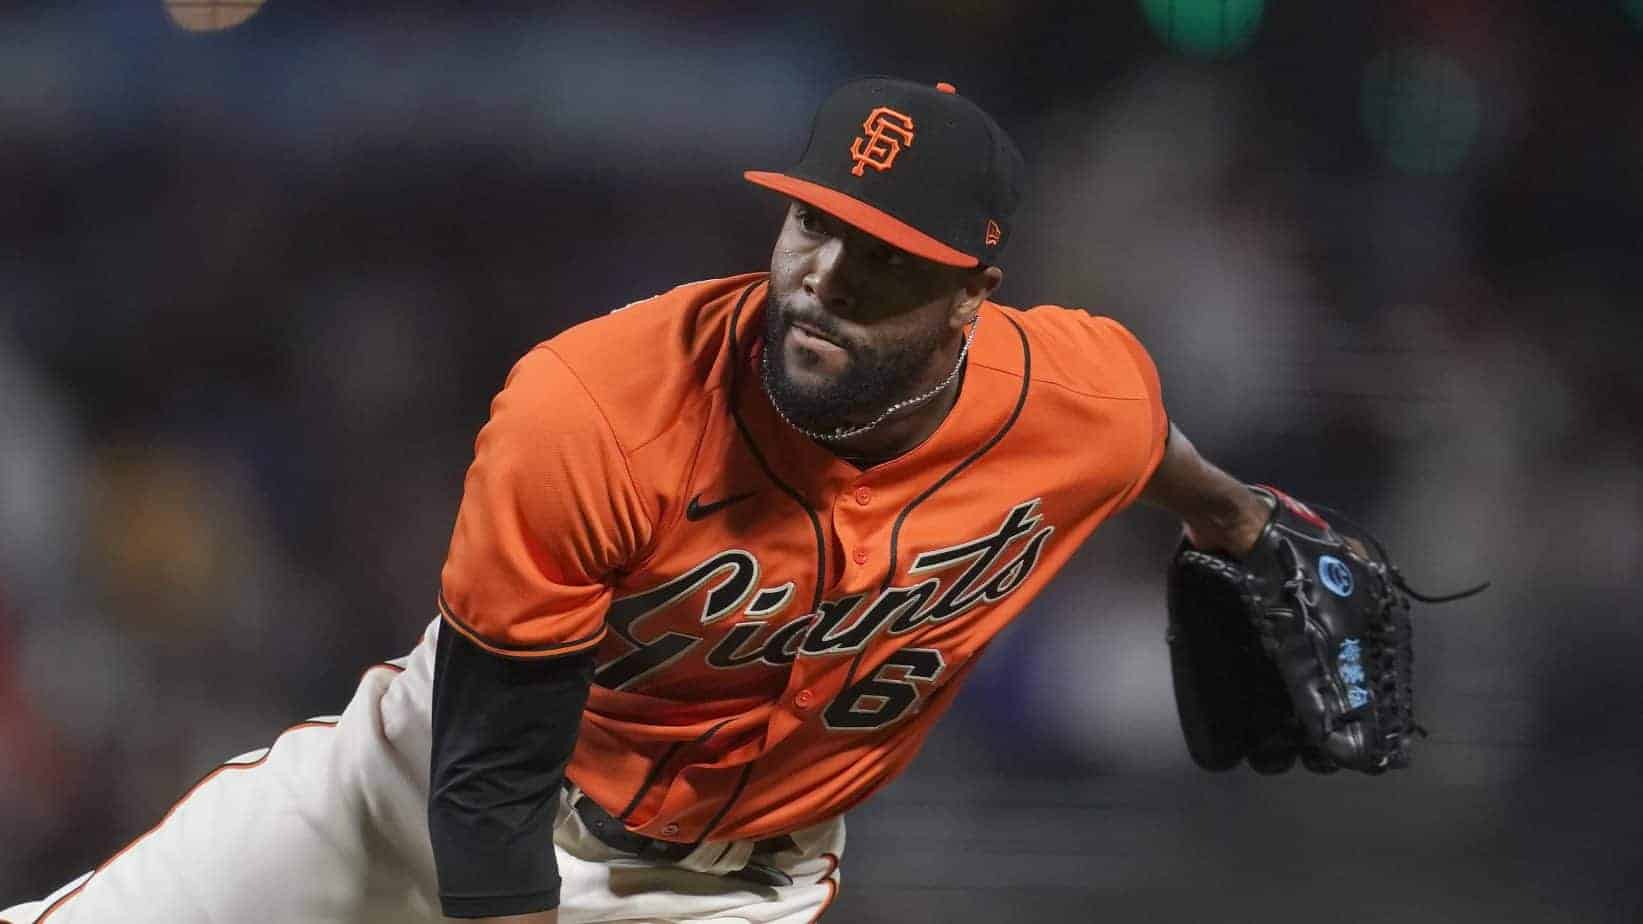 San Francisco Giants reliever Jay Jackson revealed a bunch of disgusting, racist messages after he blew a save on Monday night